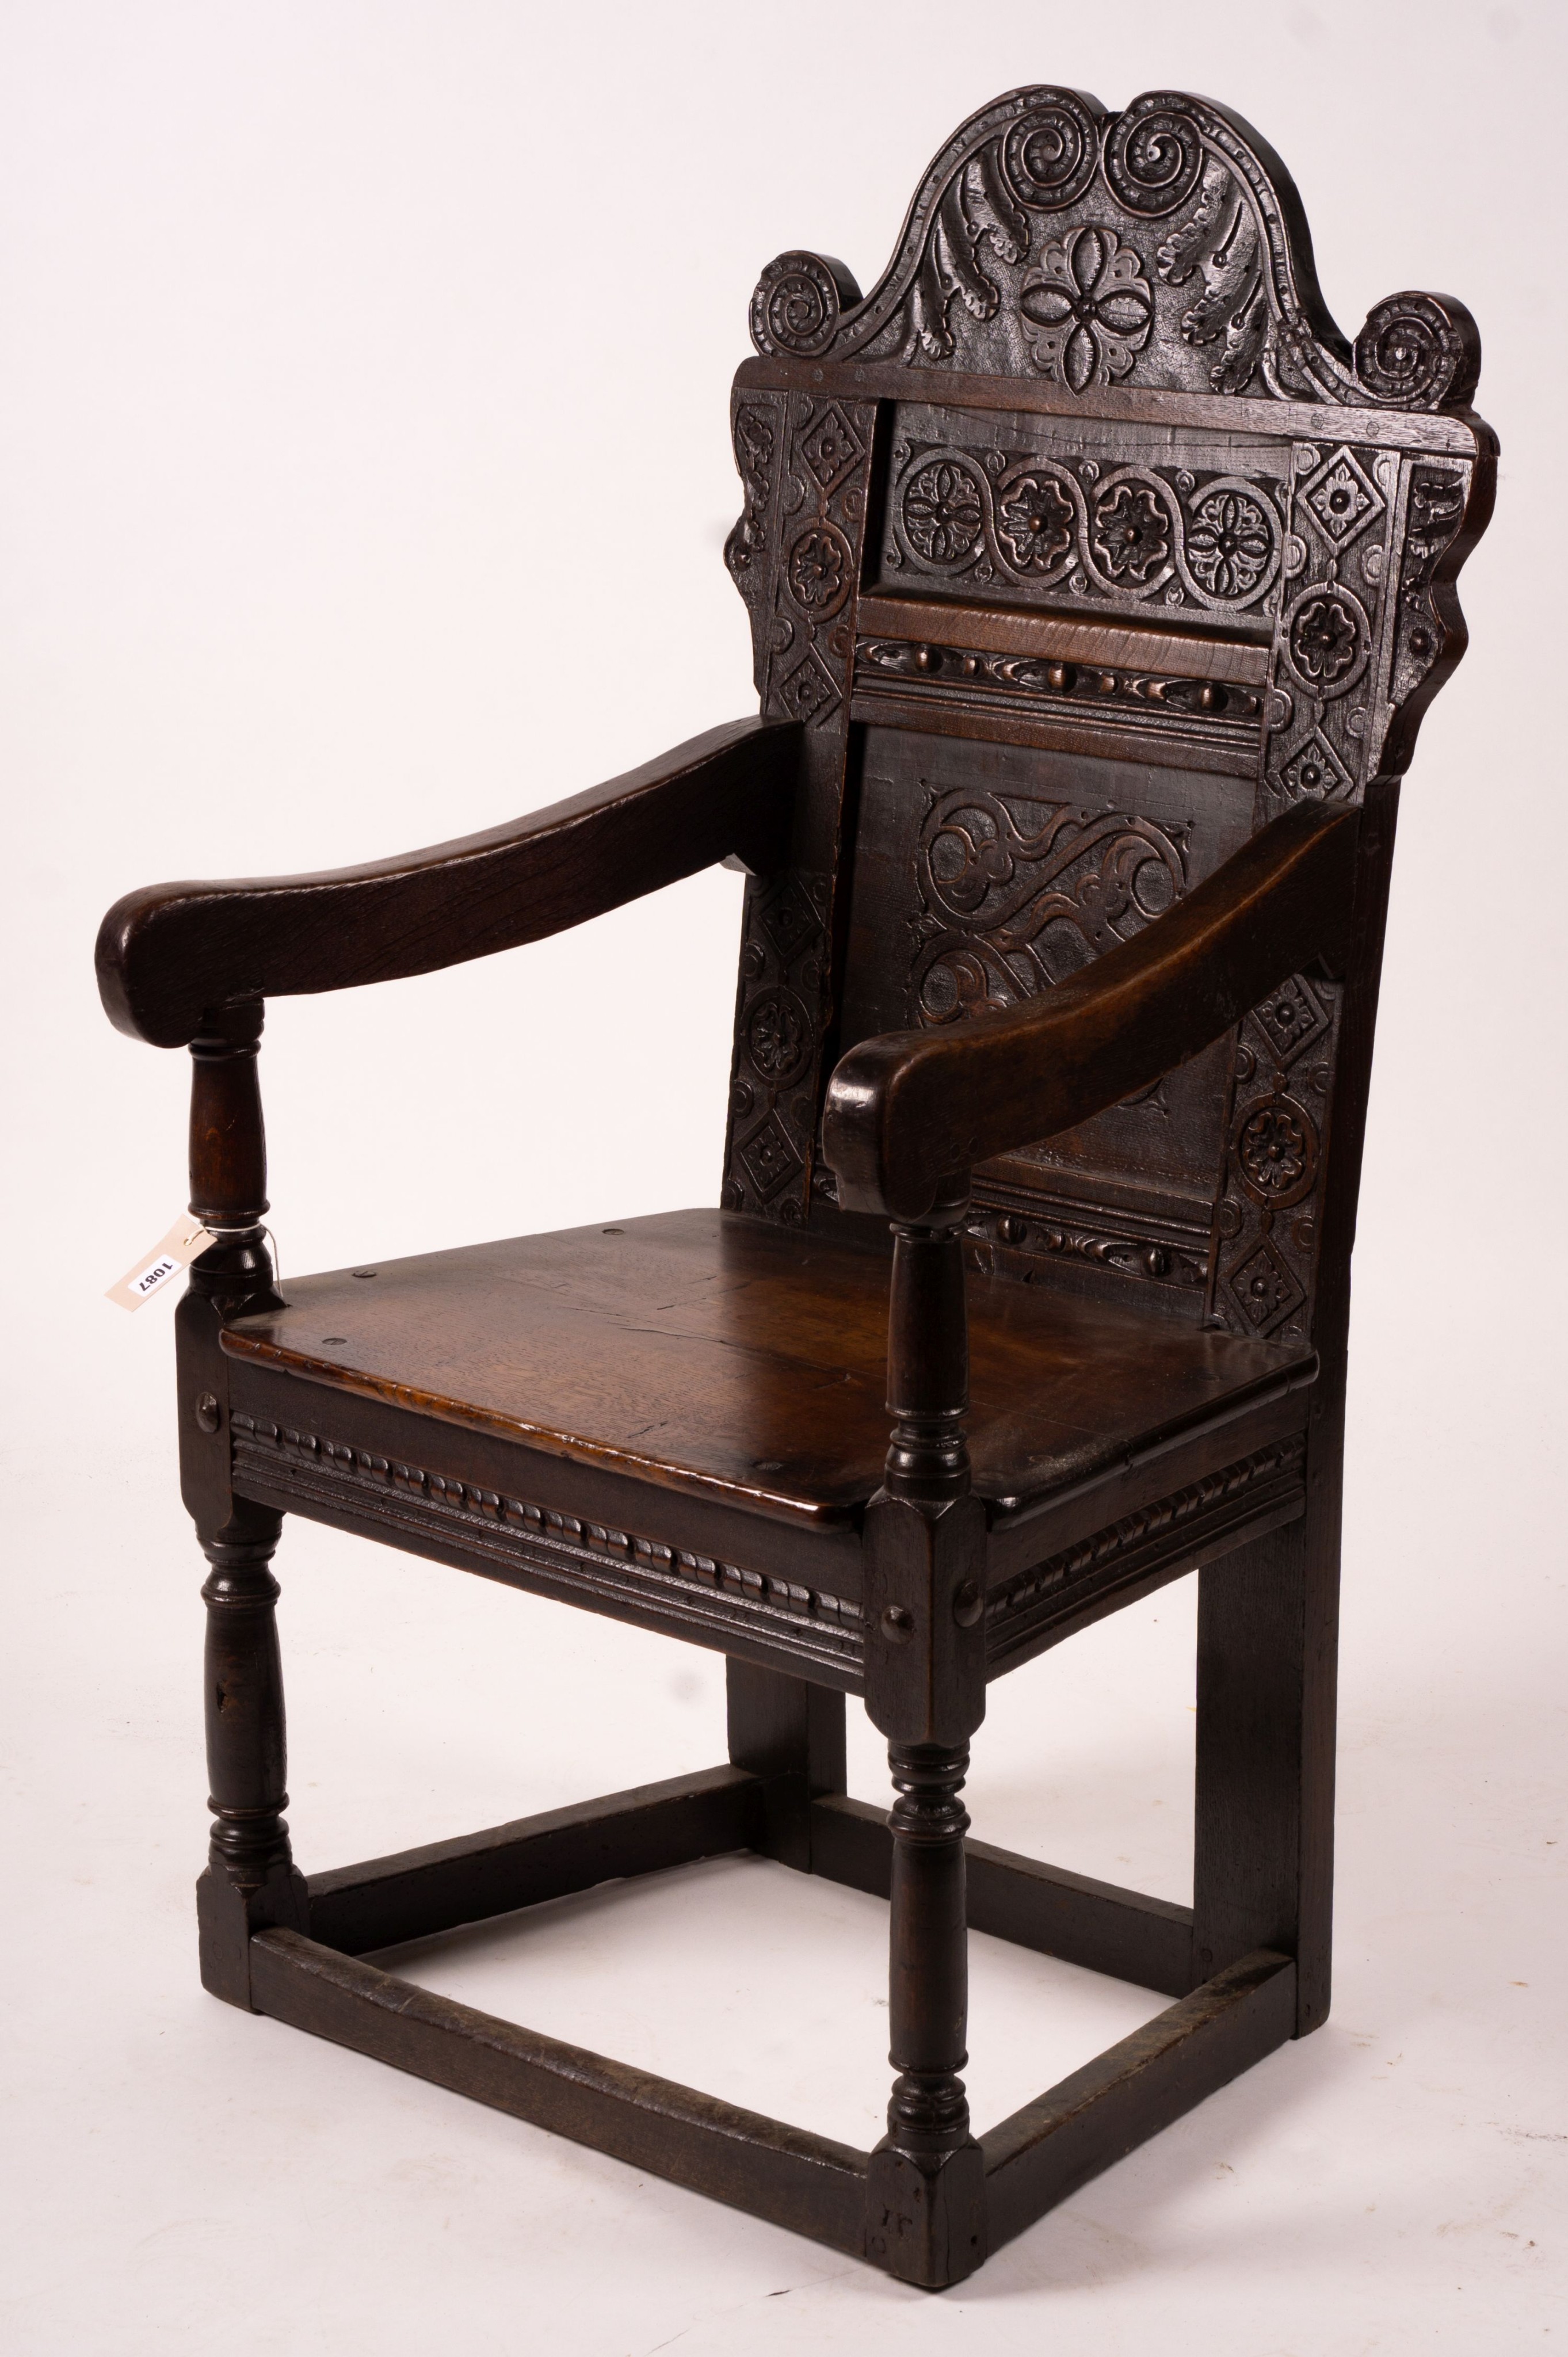 A 17th century Yorkshire area carved oak wainscot chair, width 62cm, depth 48cm, height 118cm